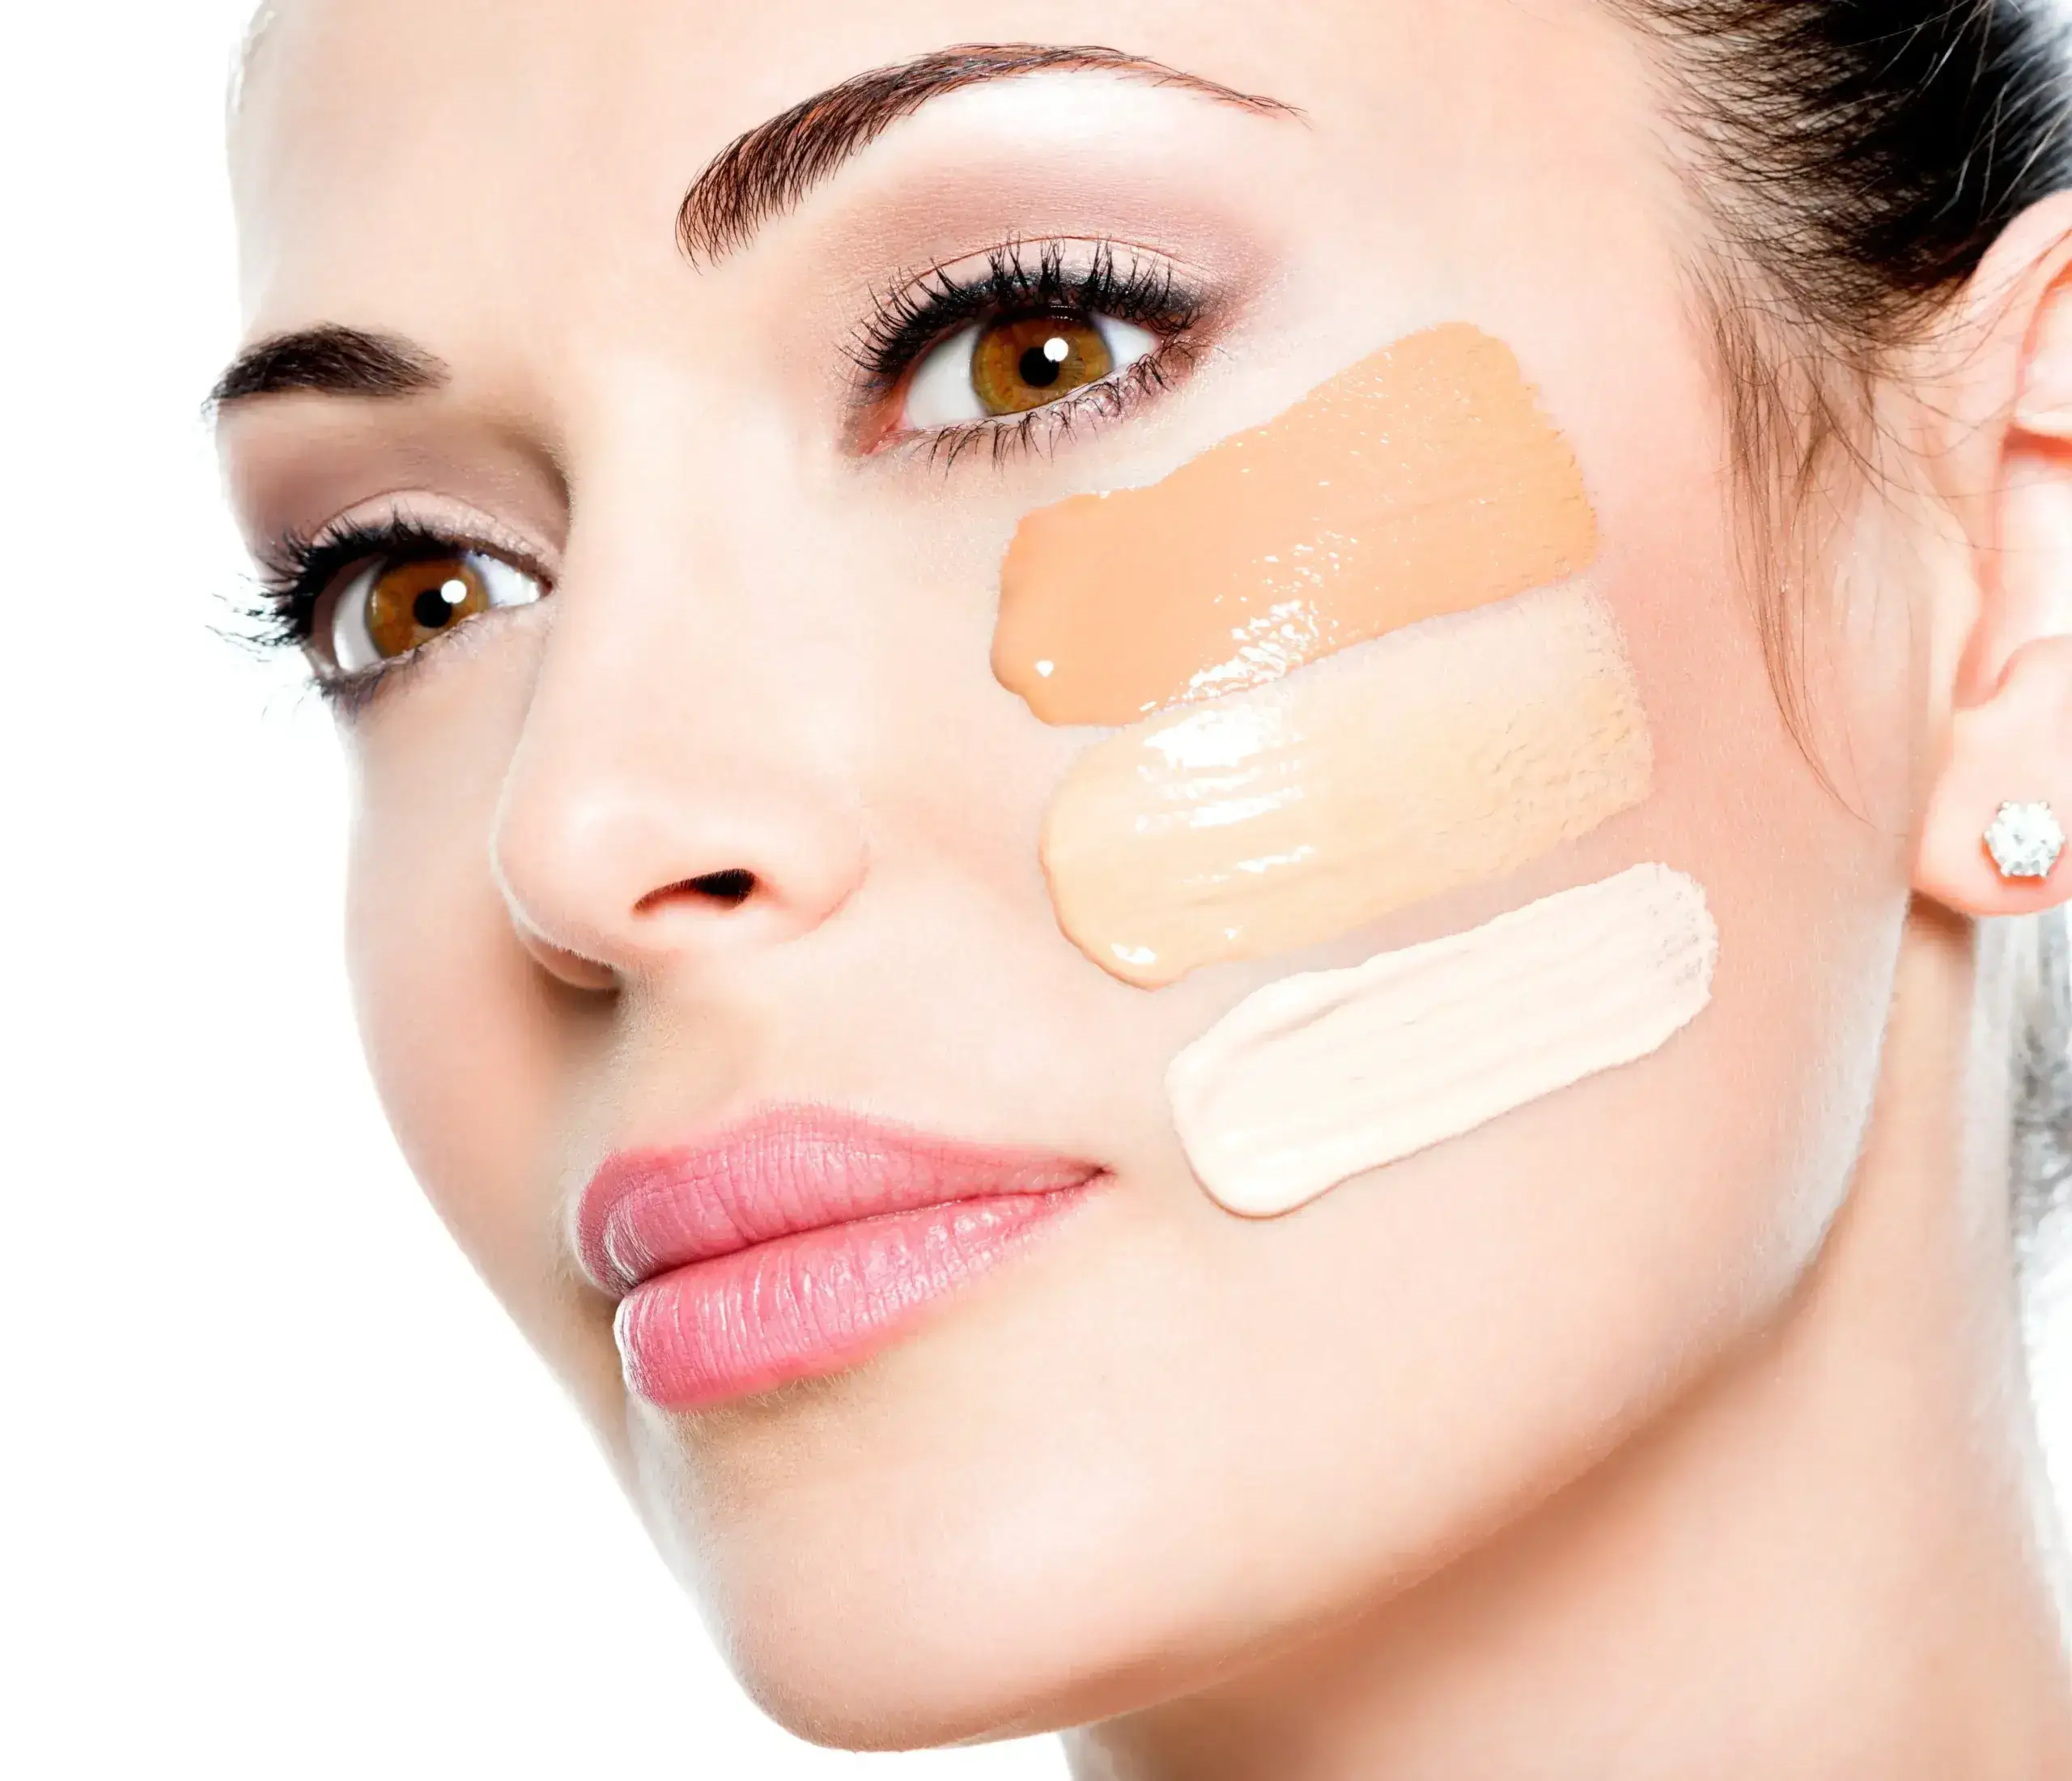 Best Primers for Oily Skin